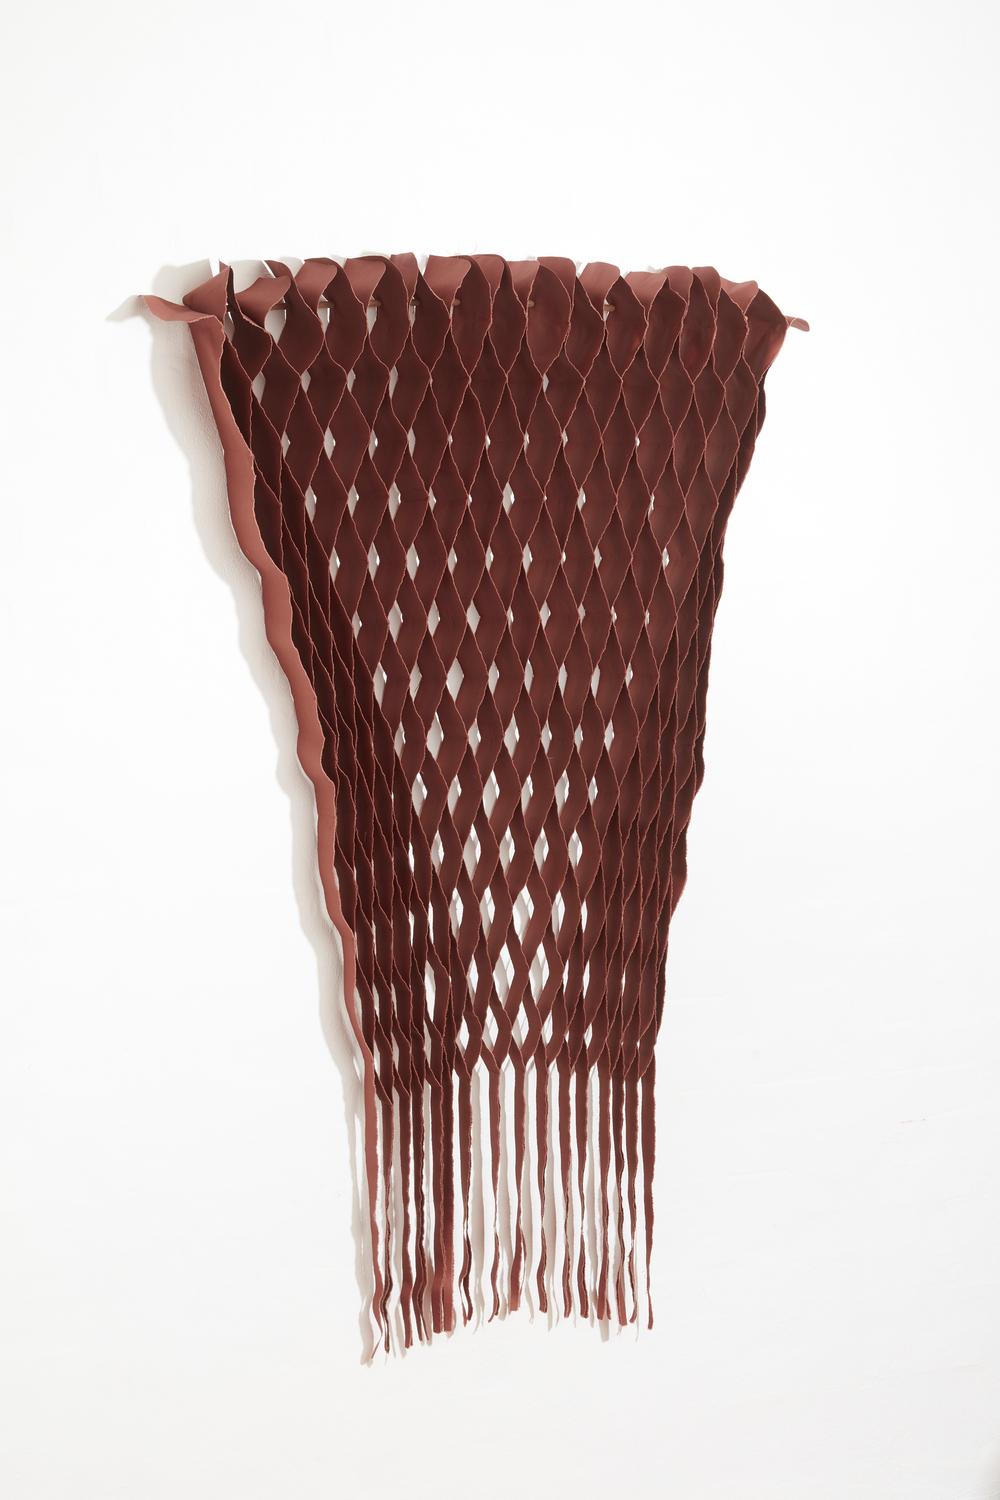 Brown Flow Wall Art by Applicata
Dimensions: D 10 x W 100 x H 150 cm
Materials: Textile.

Available in blue, brown, rose, and sand colors.

The FLOW Collection is a series of handmade textile art with roots in haute couture's flowing design